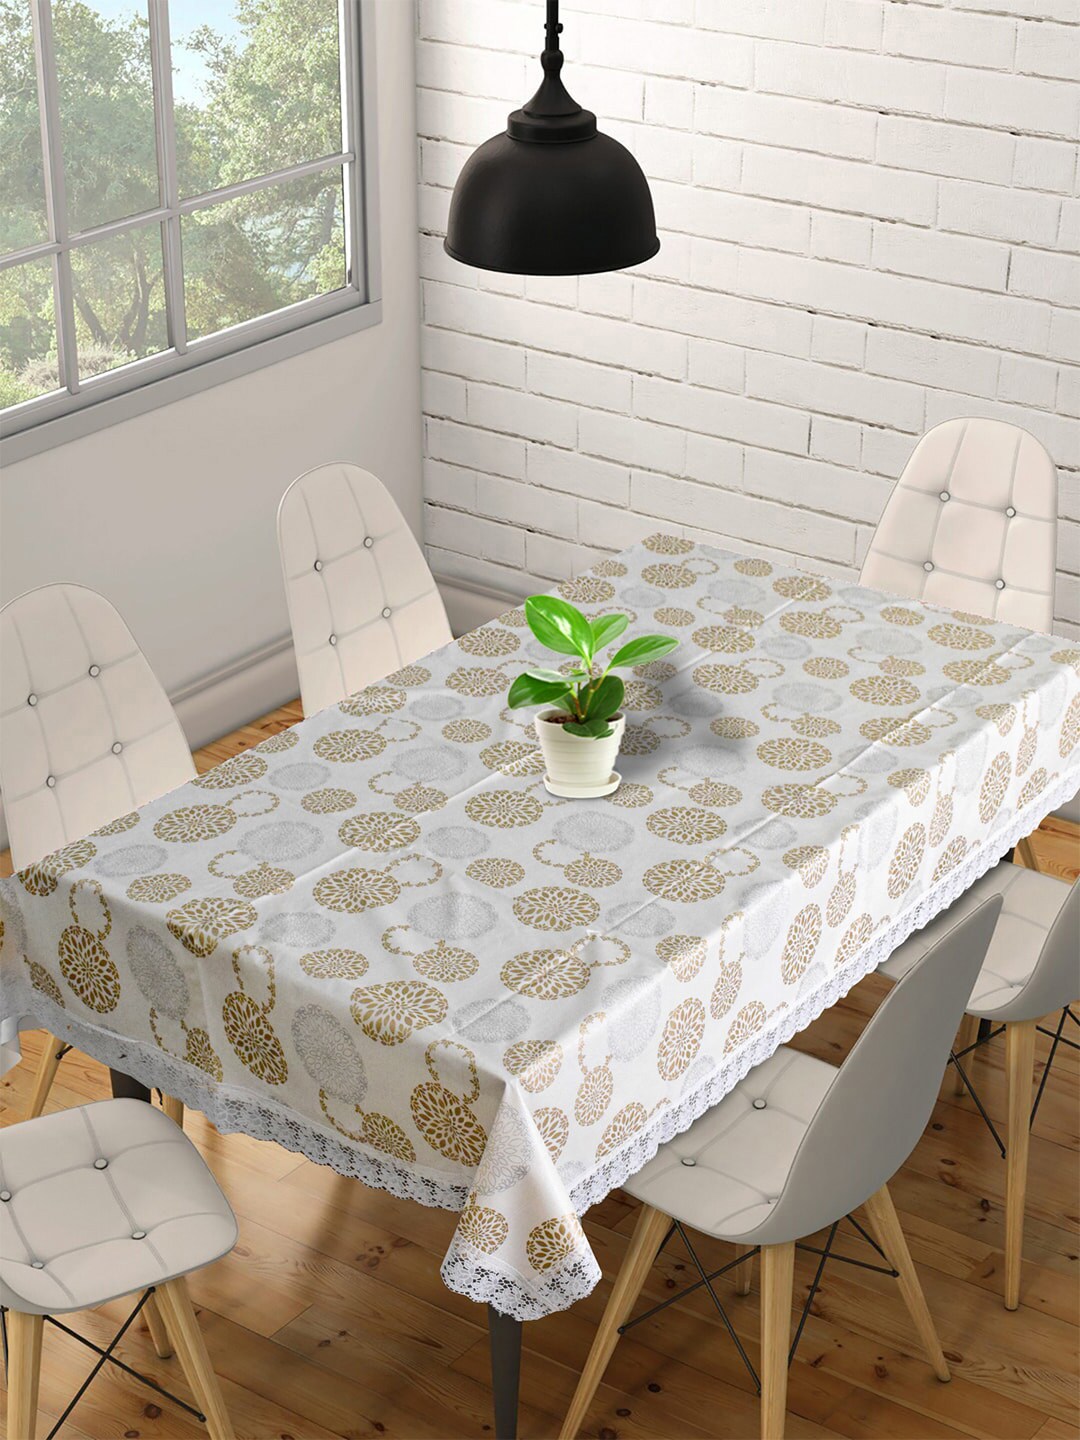 Kuber Industries Cream-Coloured & White Printed 6-Seater Waterproof Cotton Table Cover Price in India